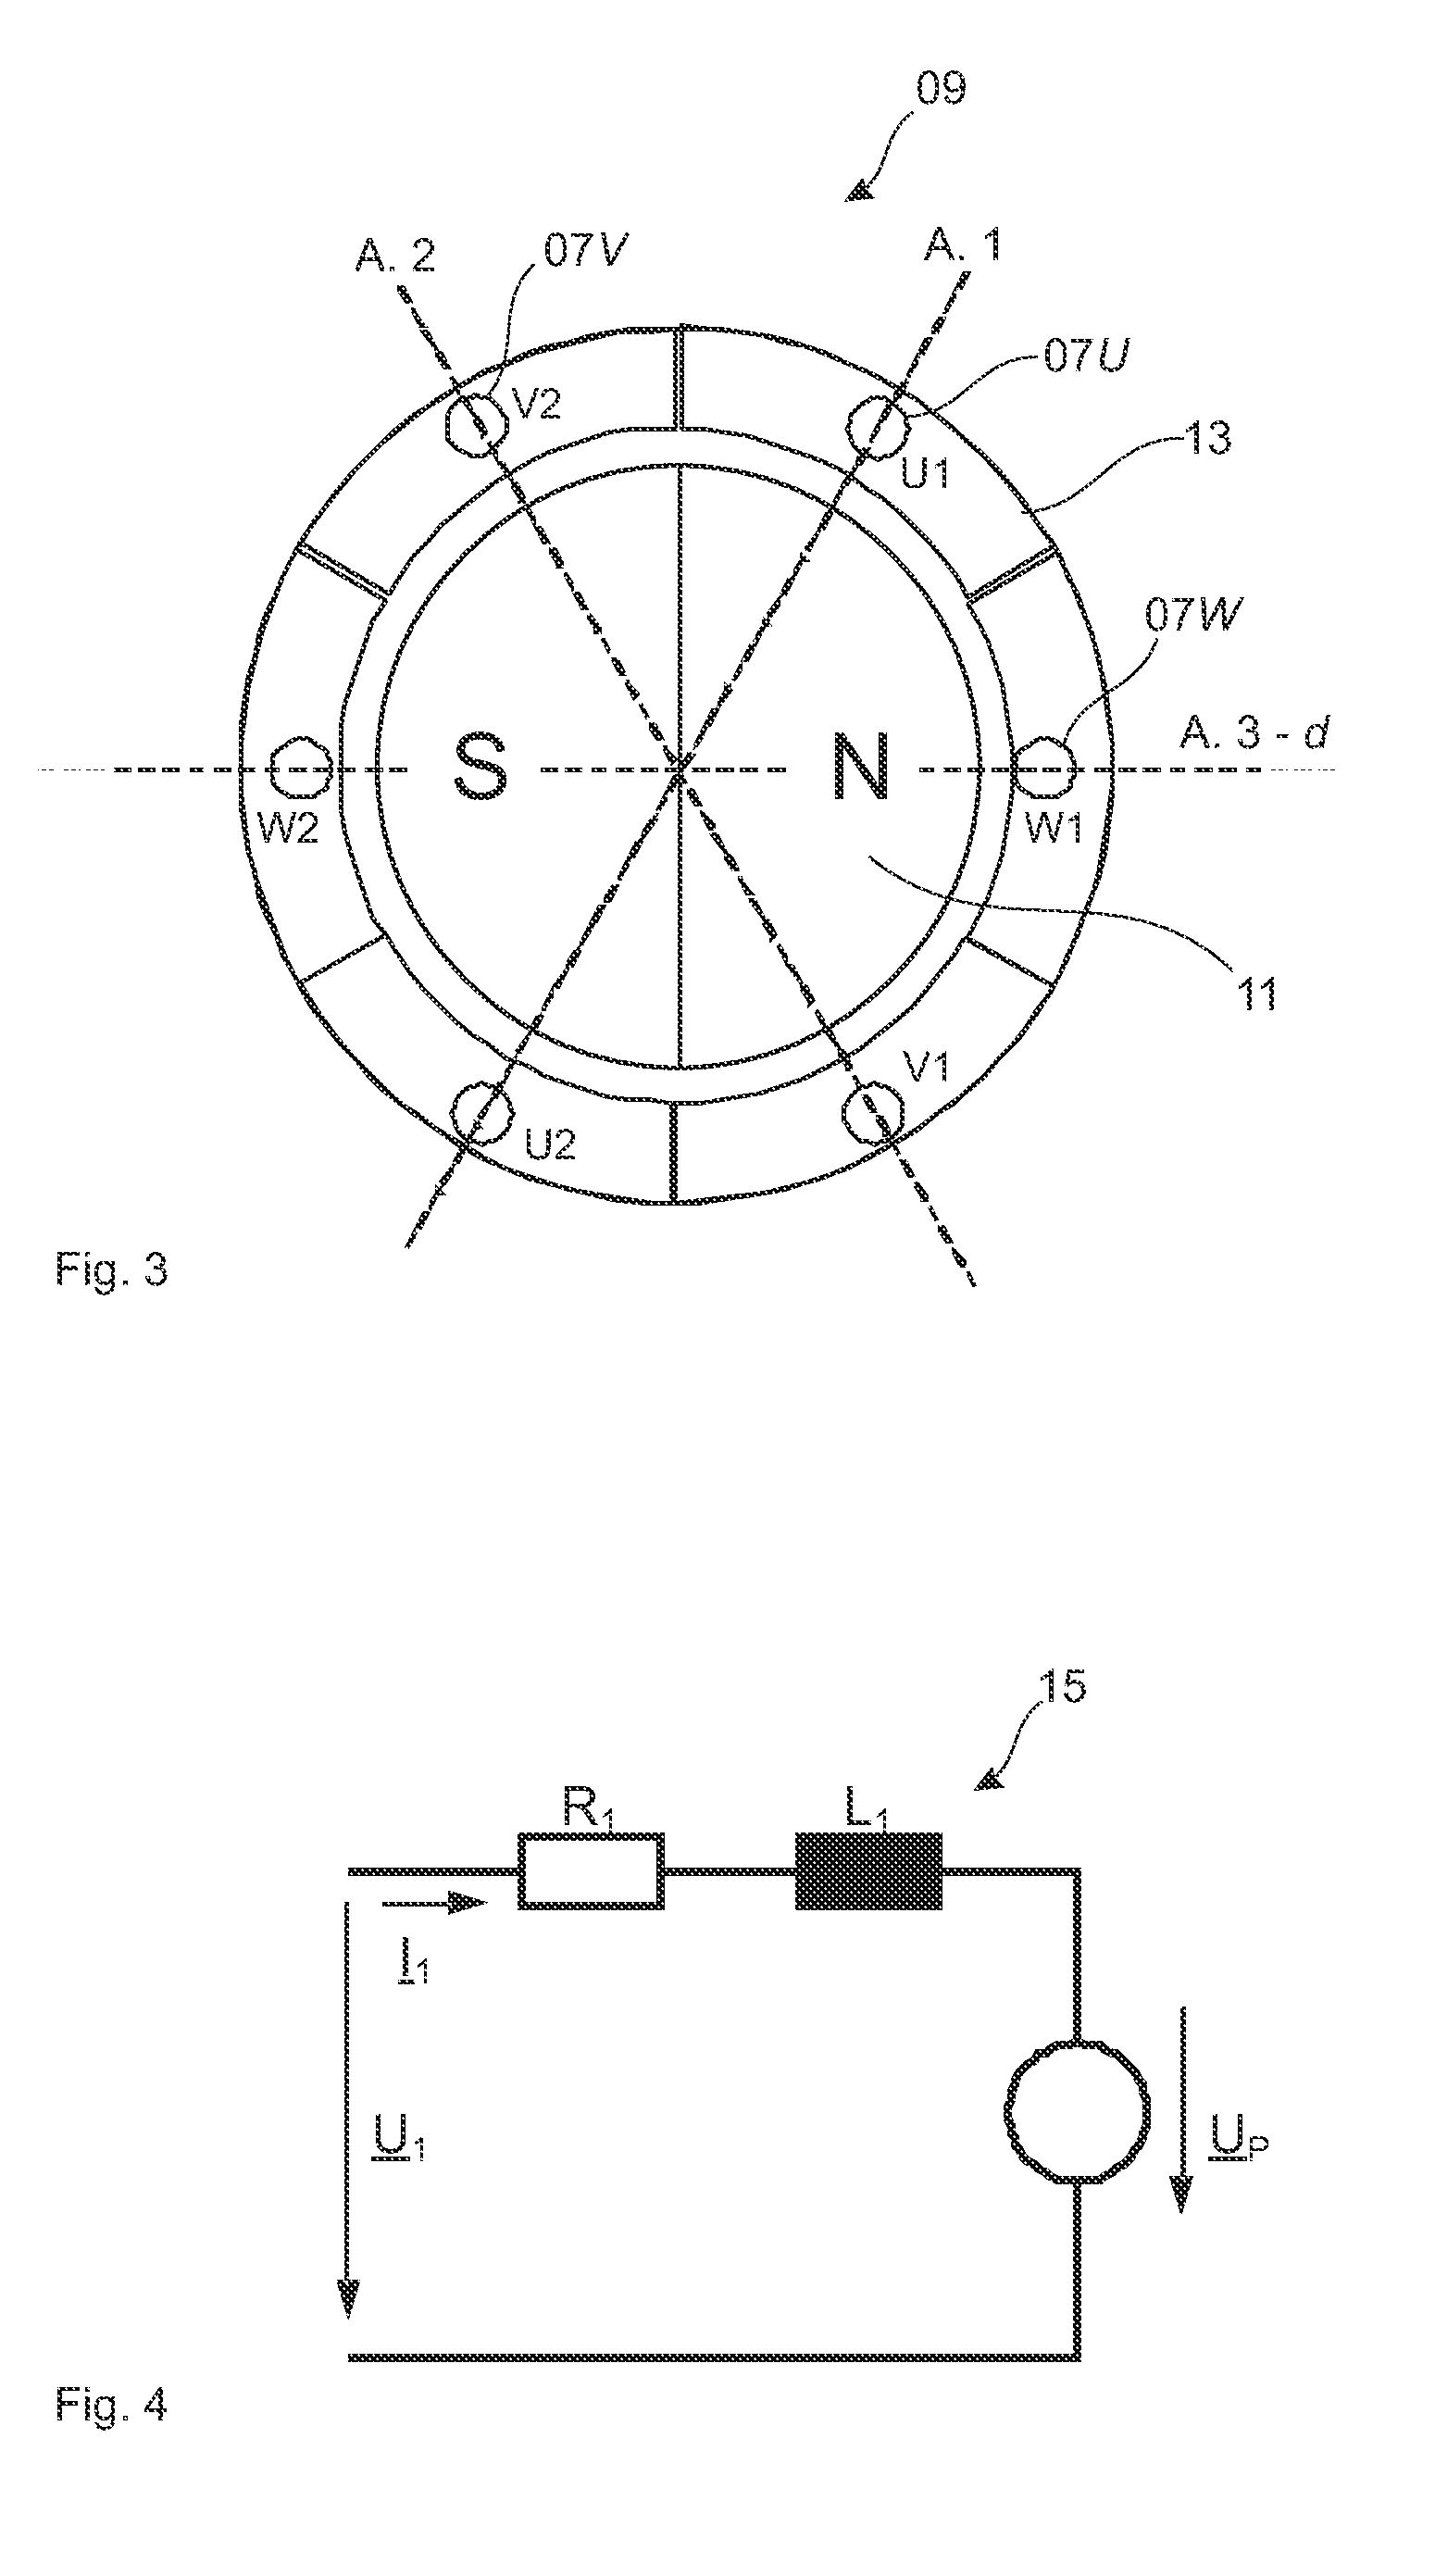 Apparatus And Method For Rotating-Sensorless Identification Of Equivalent Circuit Parameters Of An AC Synchronous Motor